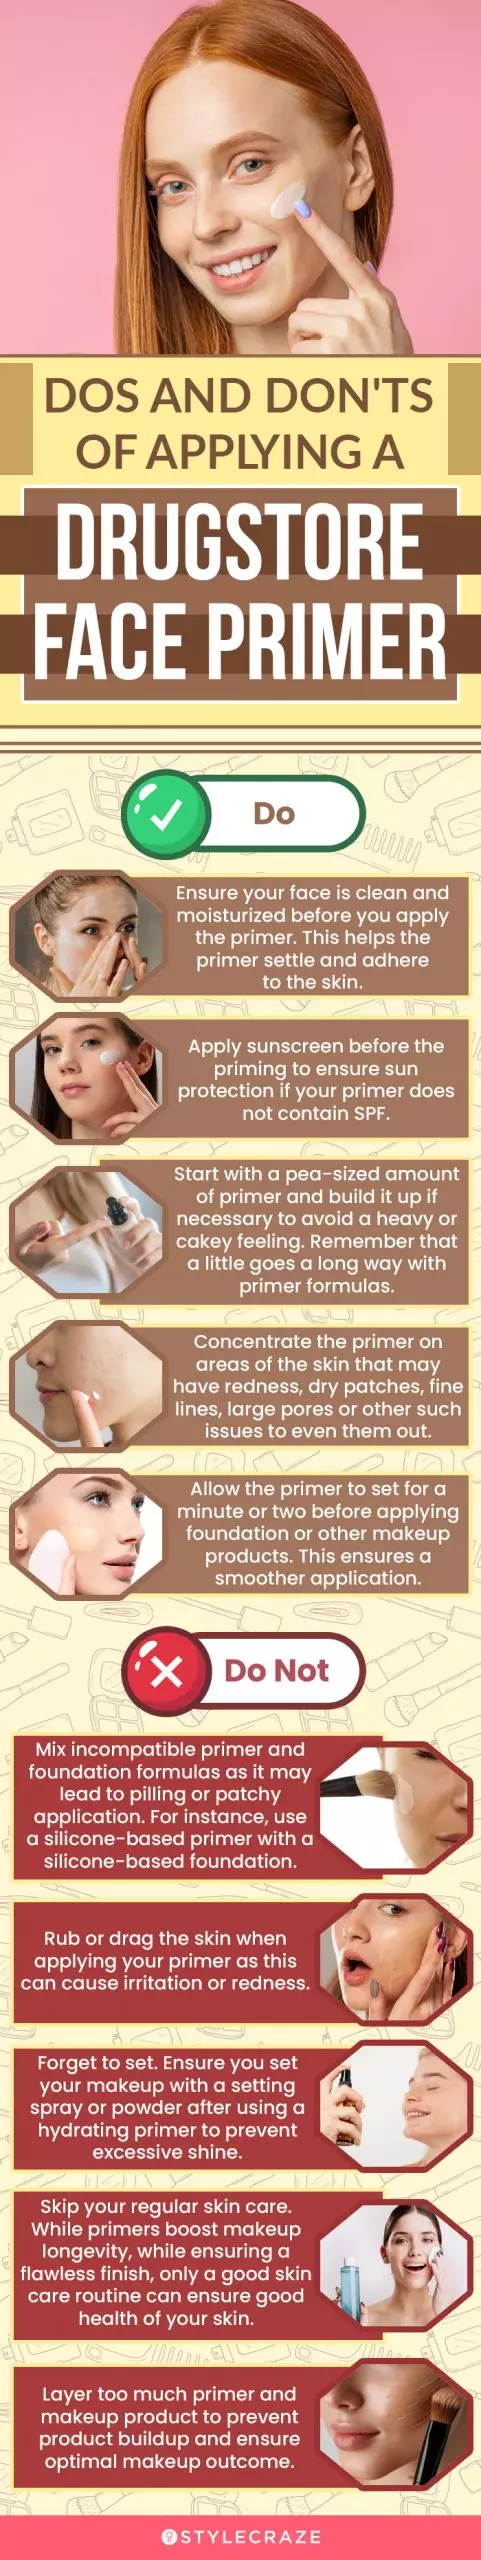 Dos And Don'ts Of Applying A Drugstore Face Primer (infographic)